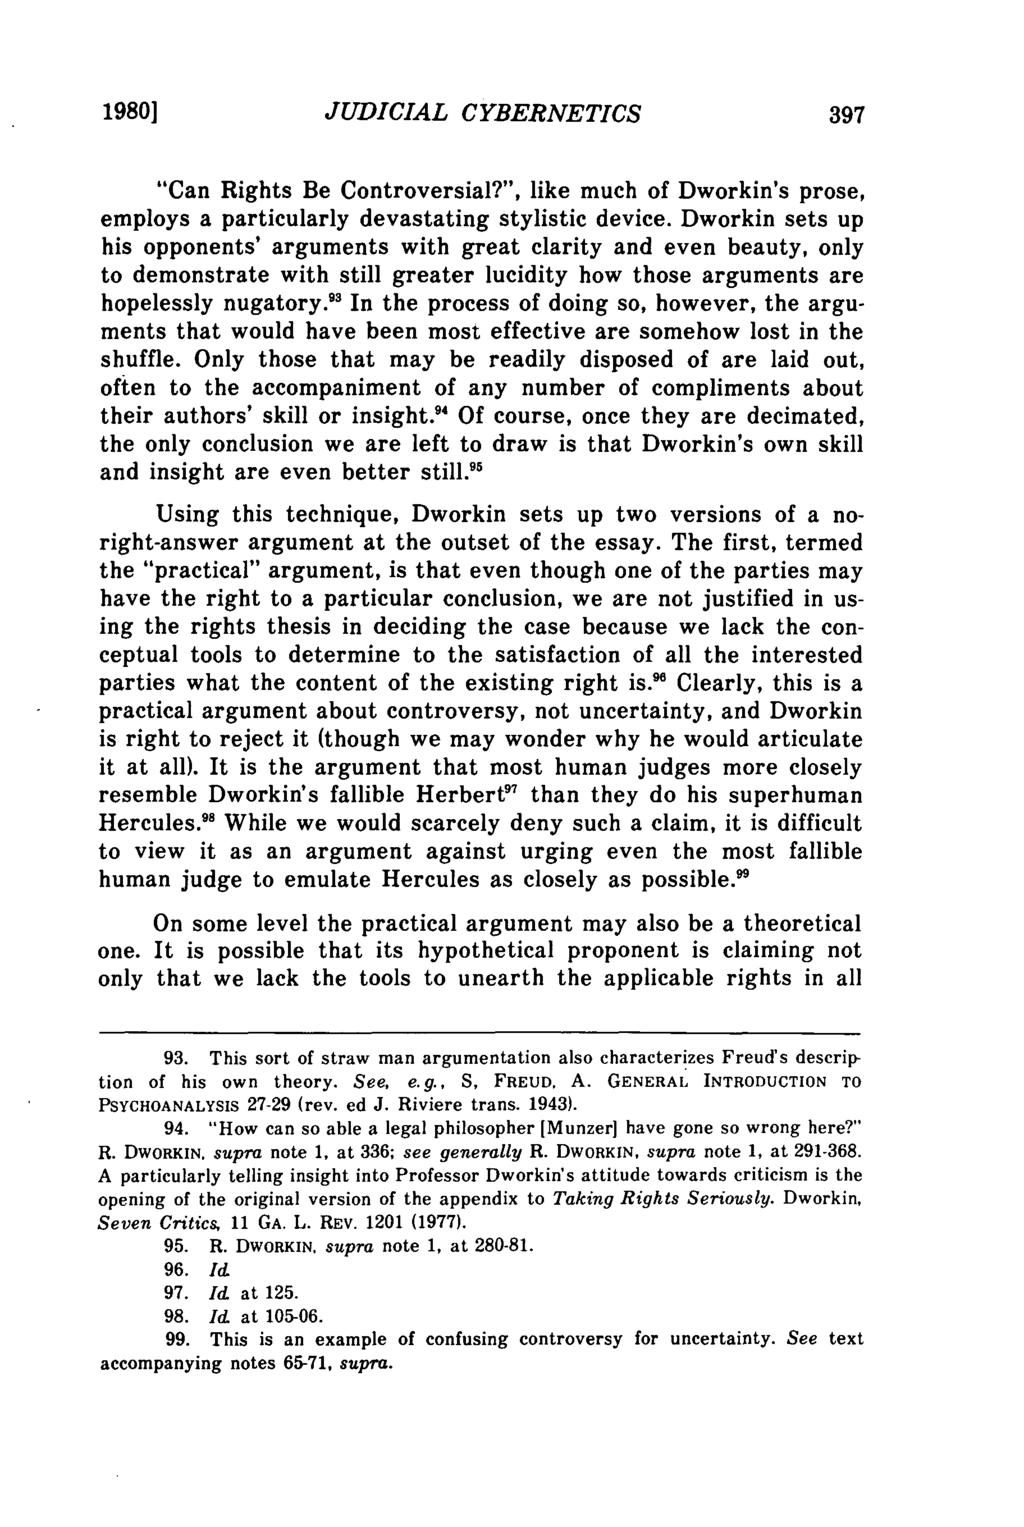 1980] Farago: Judicial Cybernetics: The Effects of Self-Reference in Dworkin's JUDICIAL CYBERNETICS "Can Rights Be Controversial?